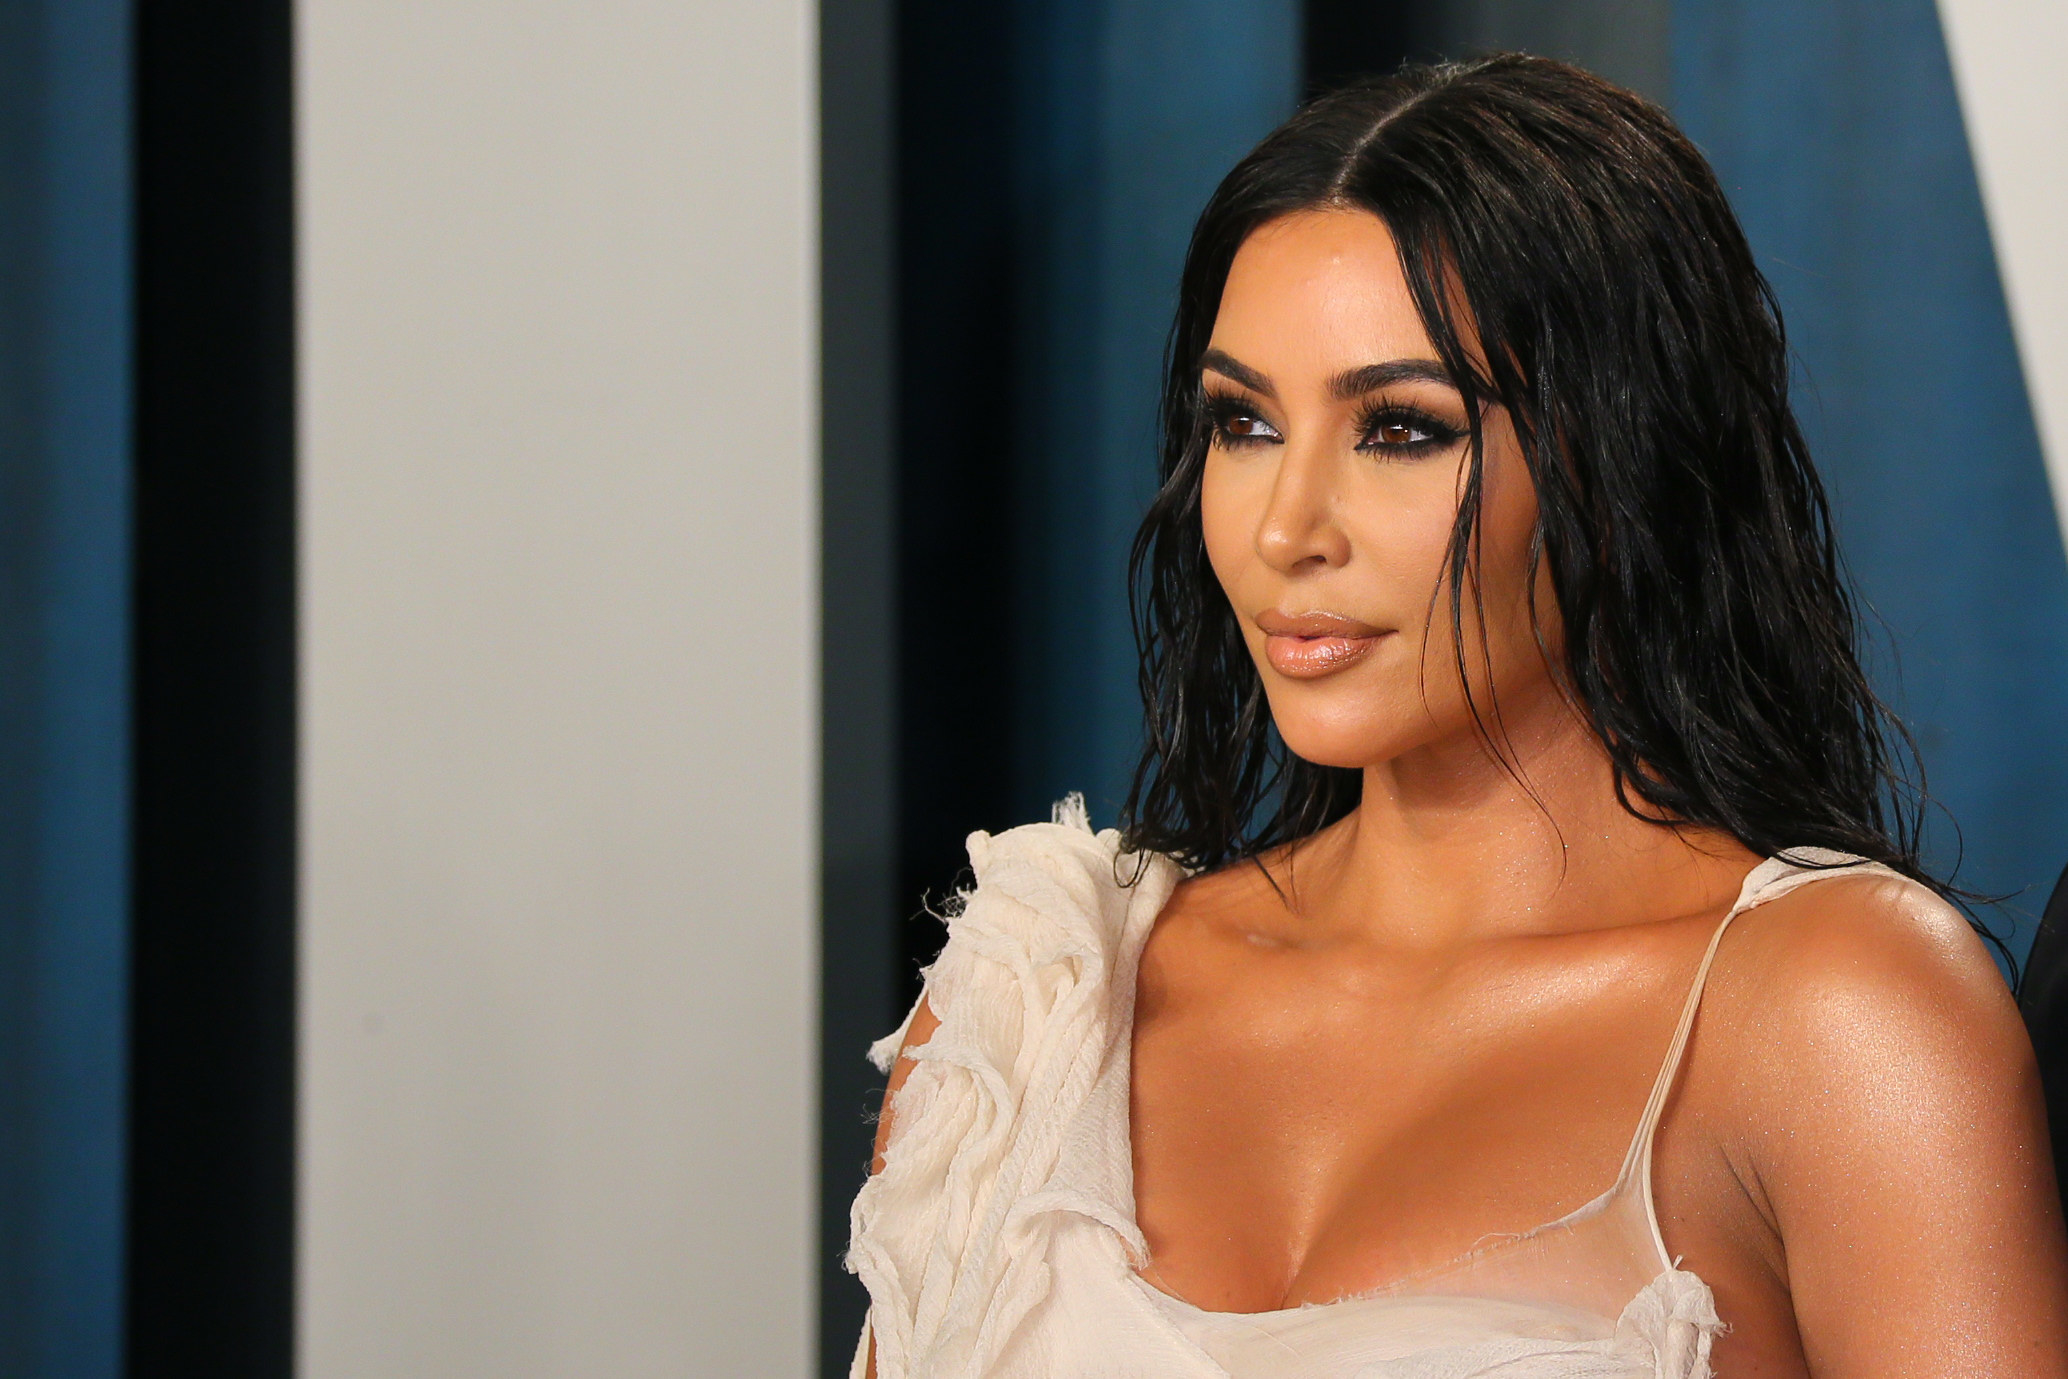 Kim Kardashian in an off-white dress looking at someone off-camera